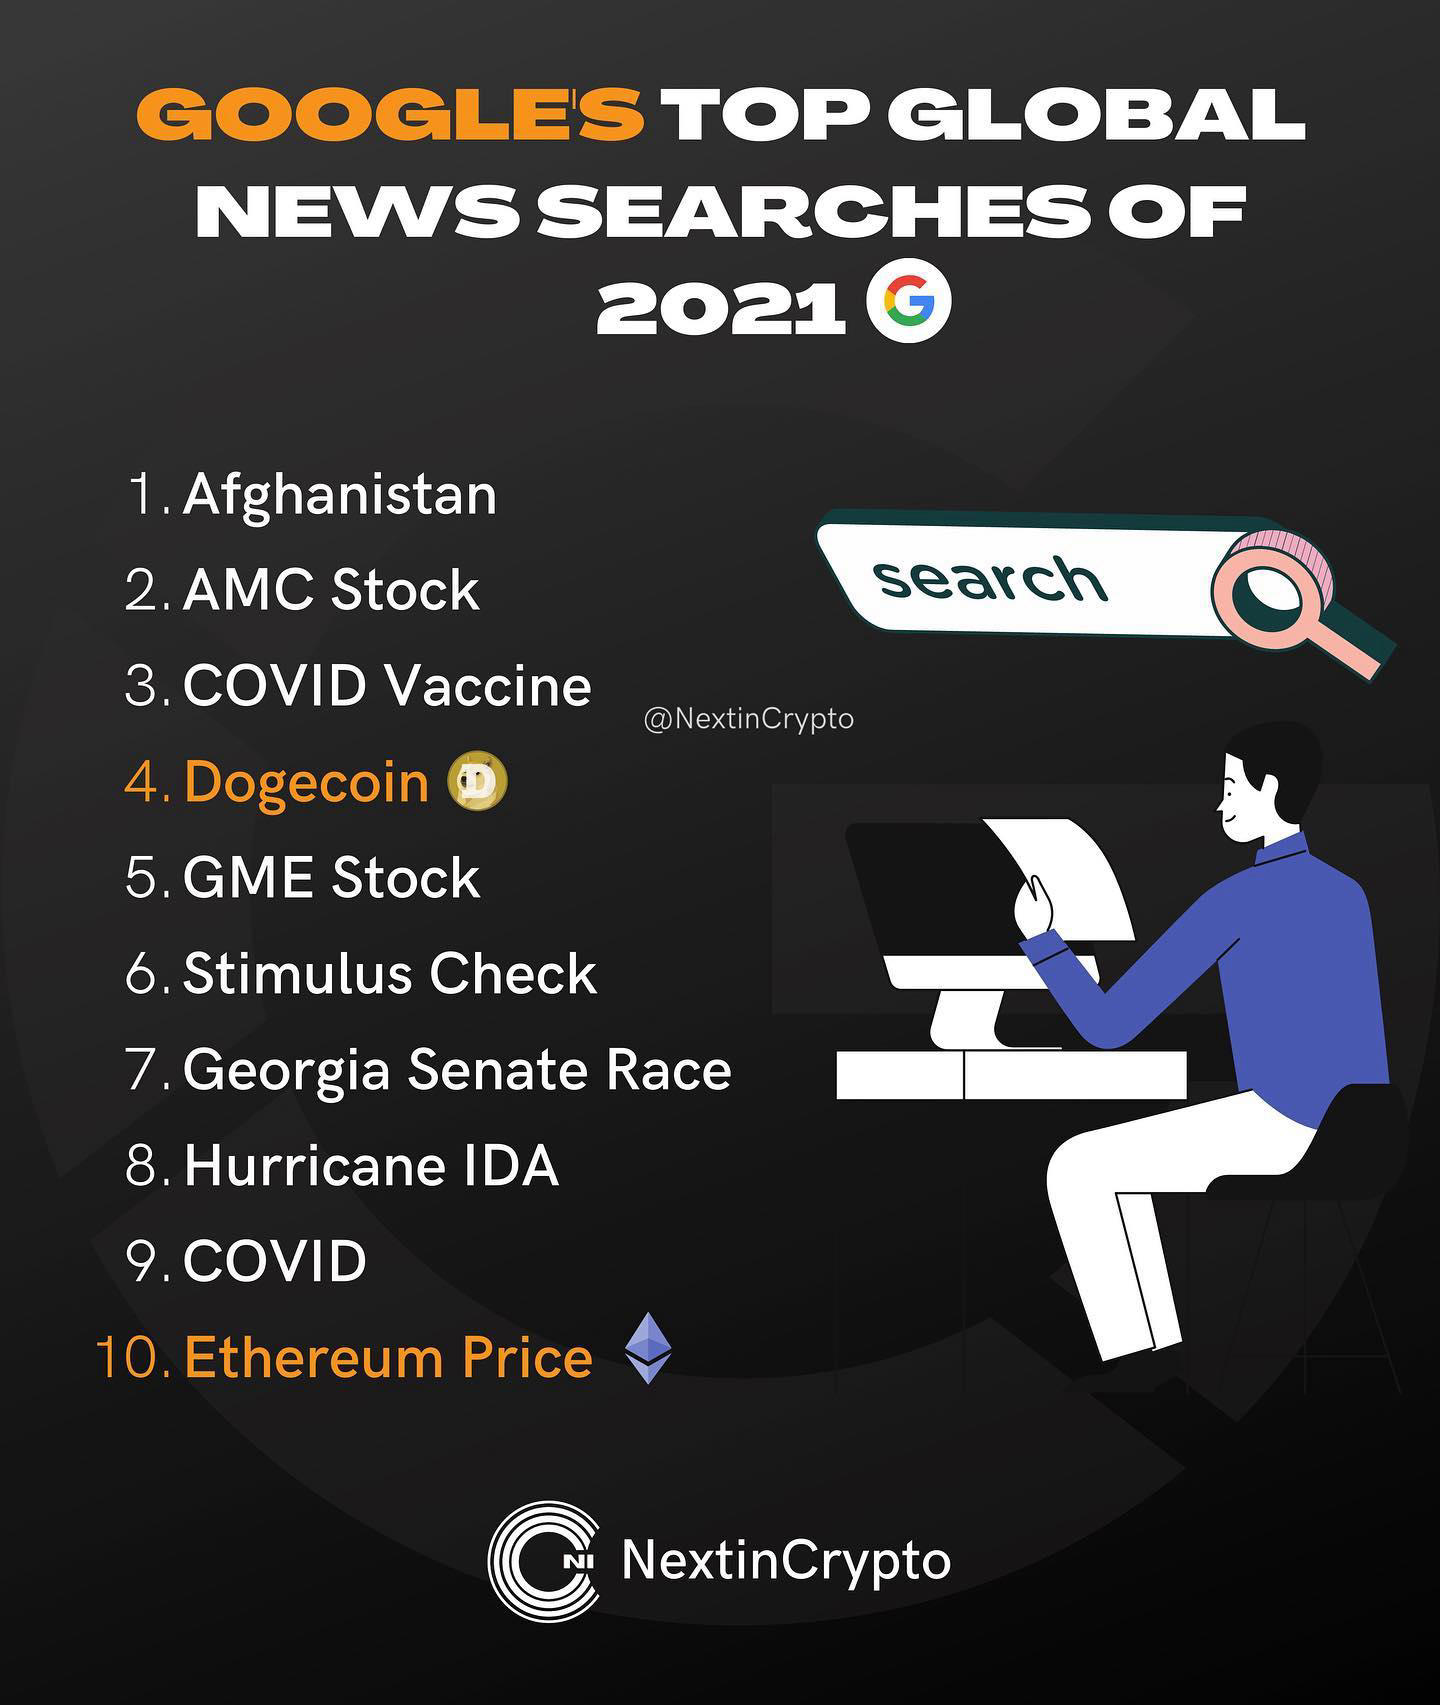 Crypto | Investment | Bitcoin - As the year comes to an end, Google’s top 10 searches list has come